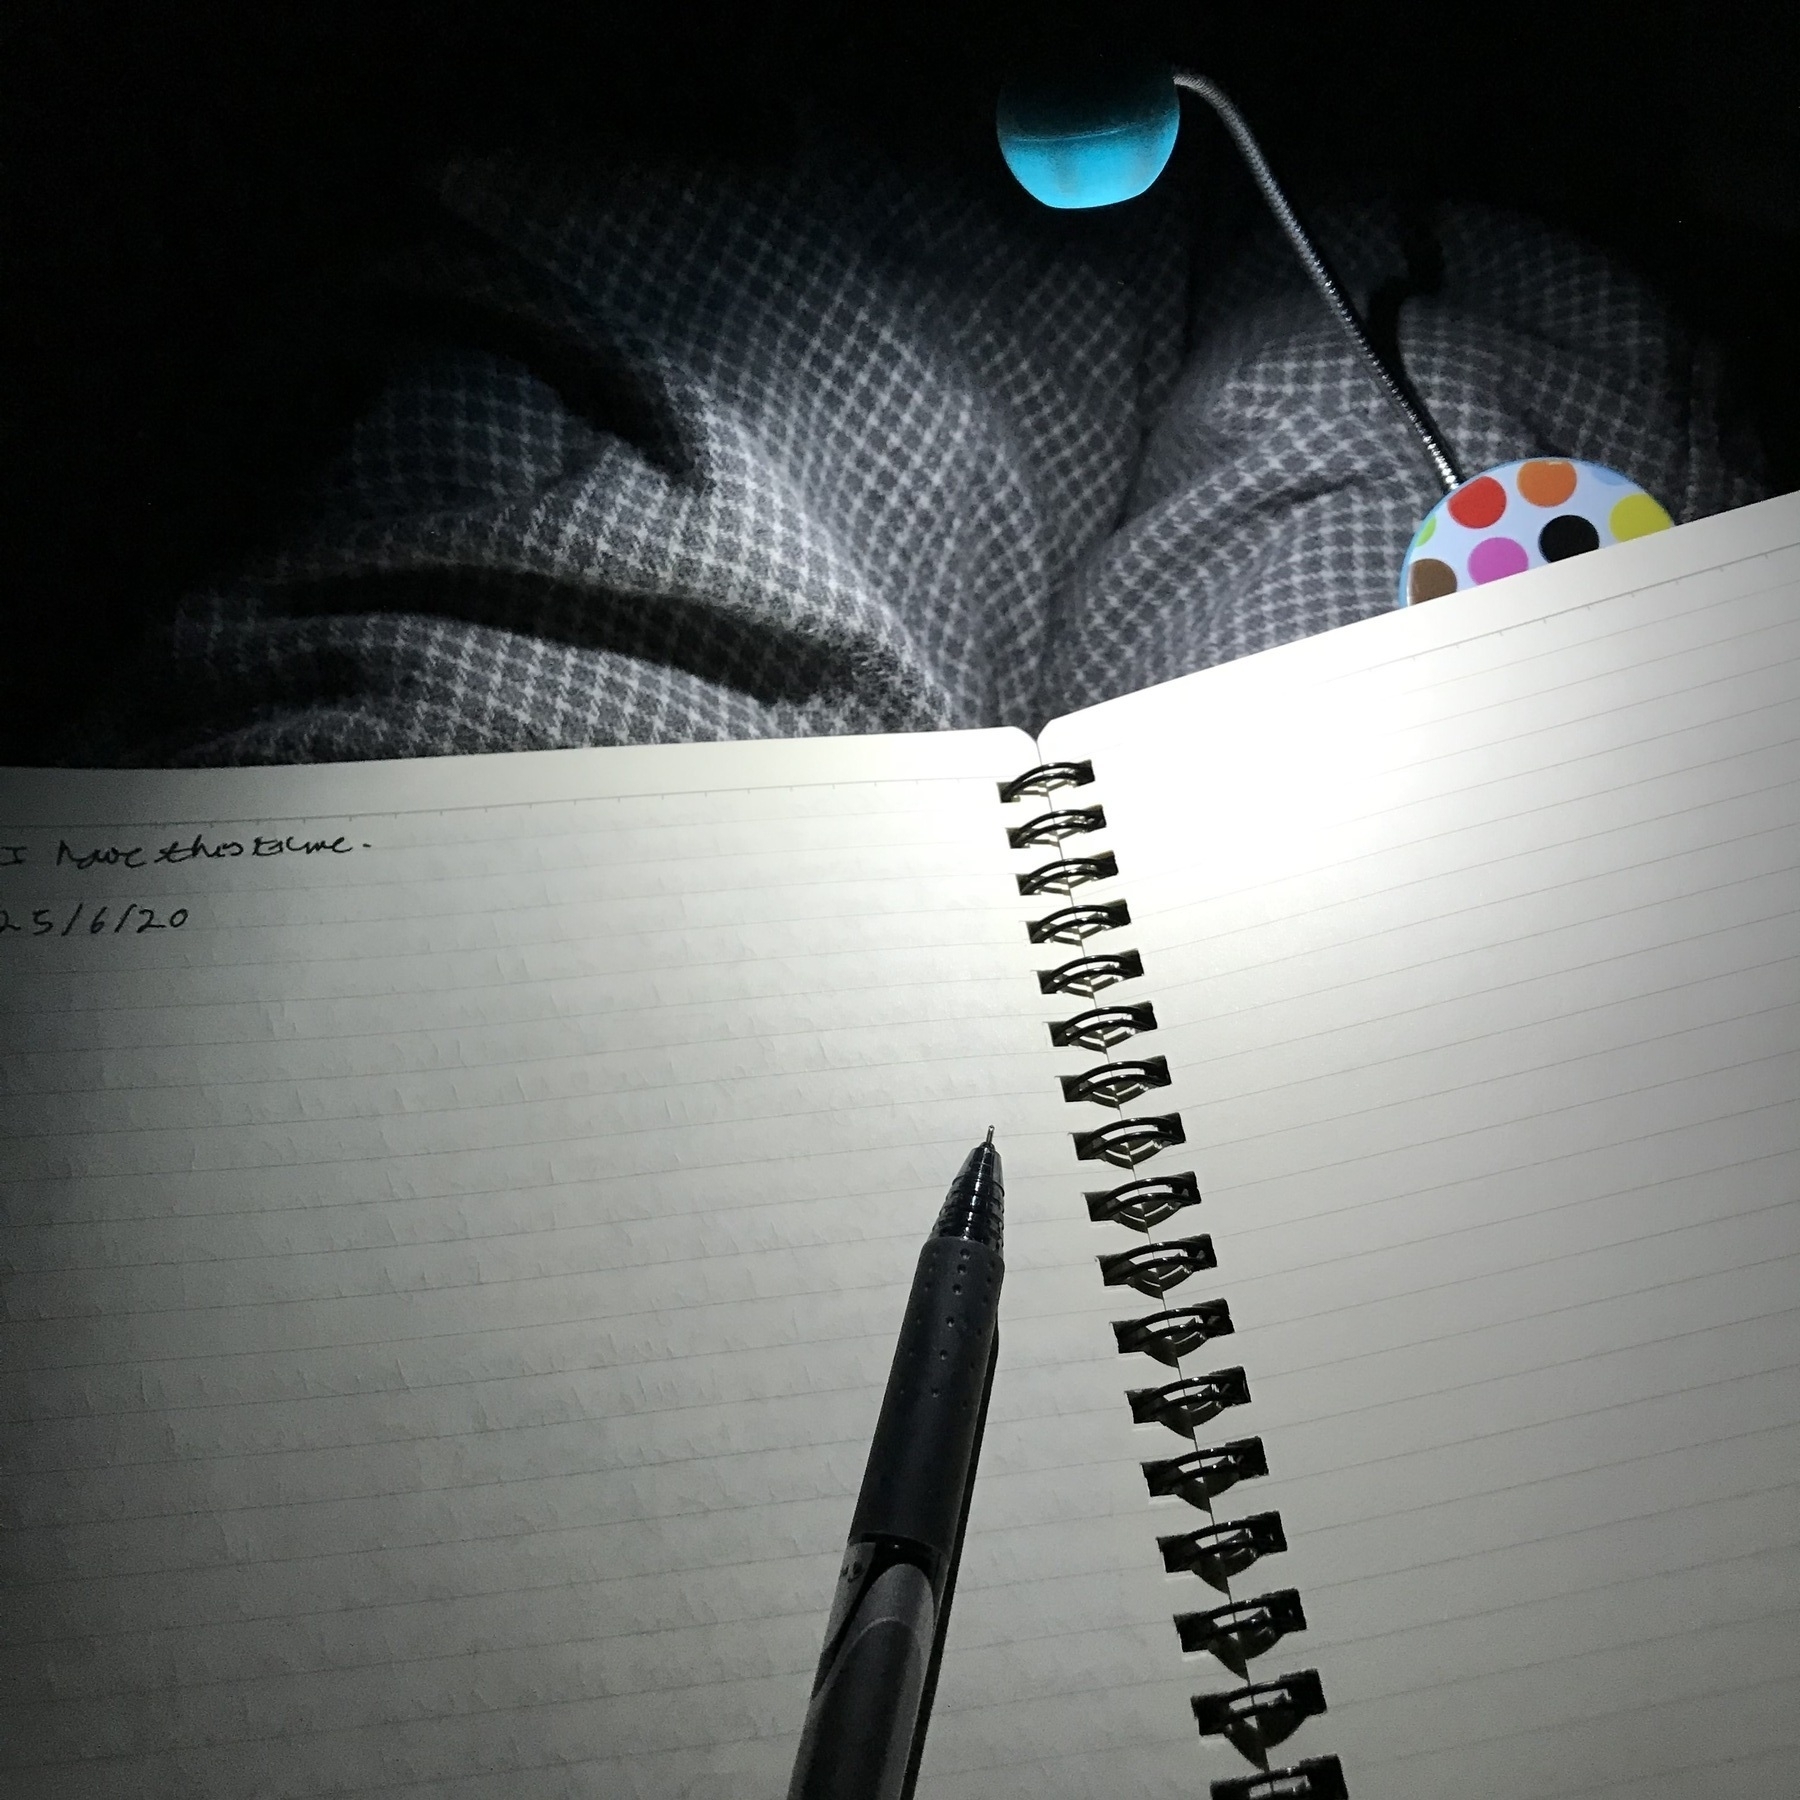 A journal resting on my lap in a dark room, illuminated by a book reading light.